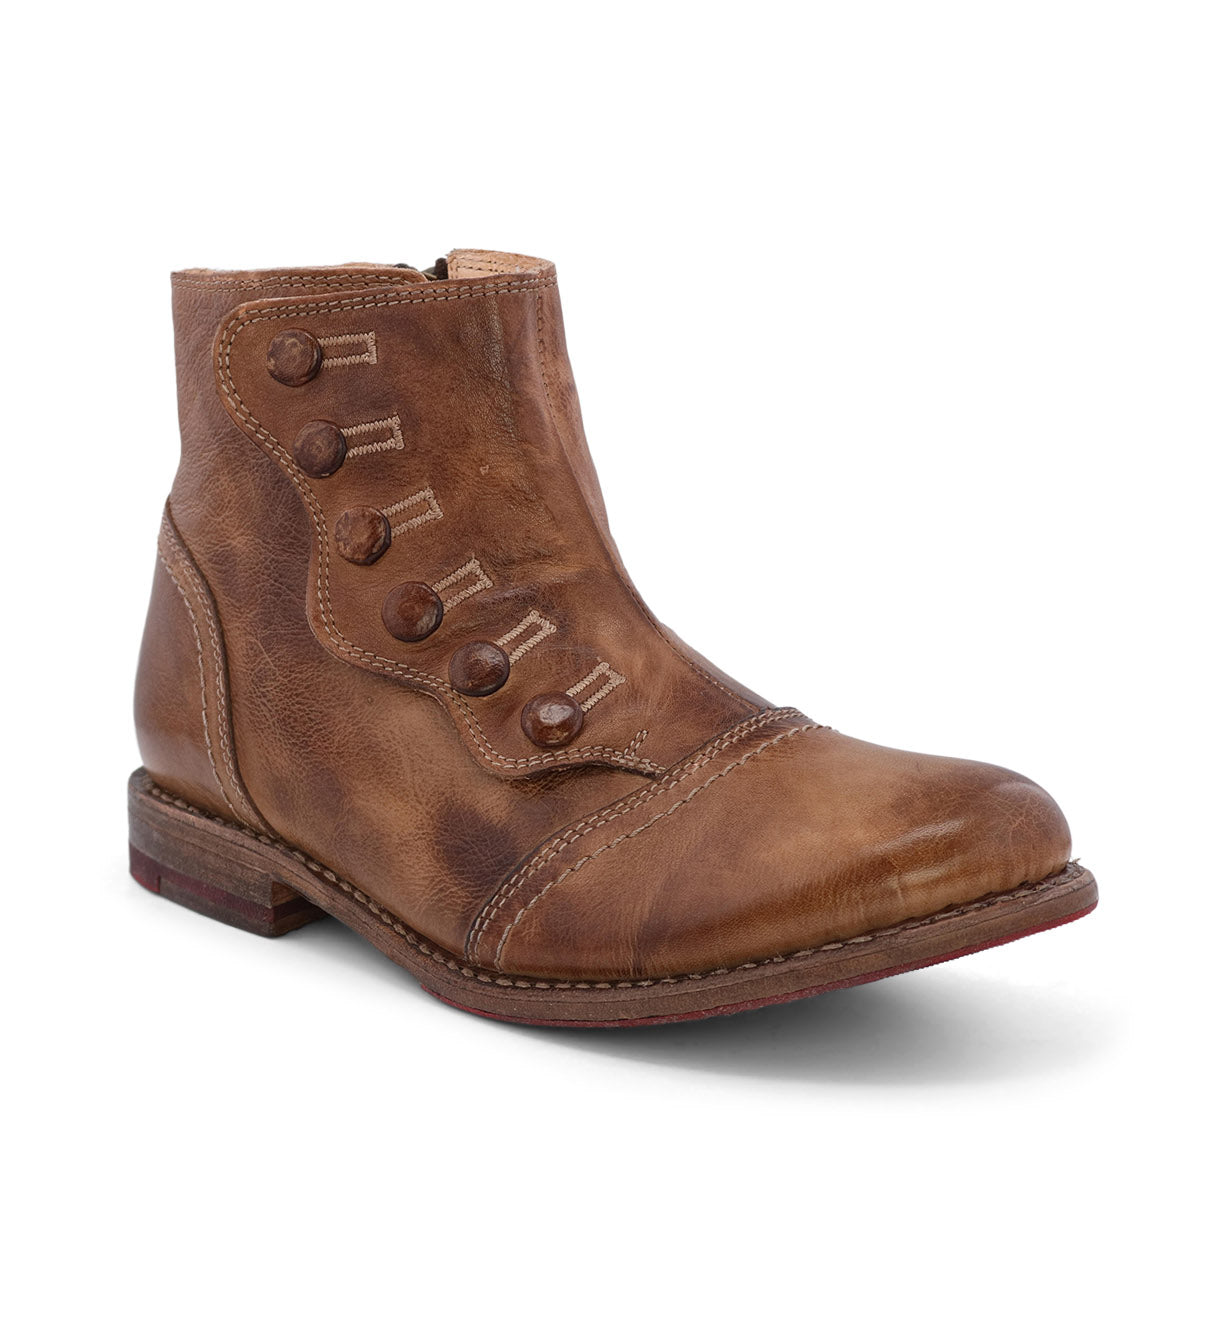 A Josephine boot by Oak Tree Farms, made of tan leather and featuring buttons on the side.